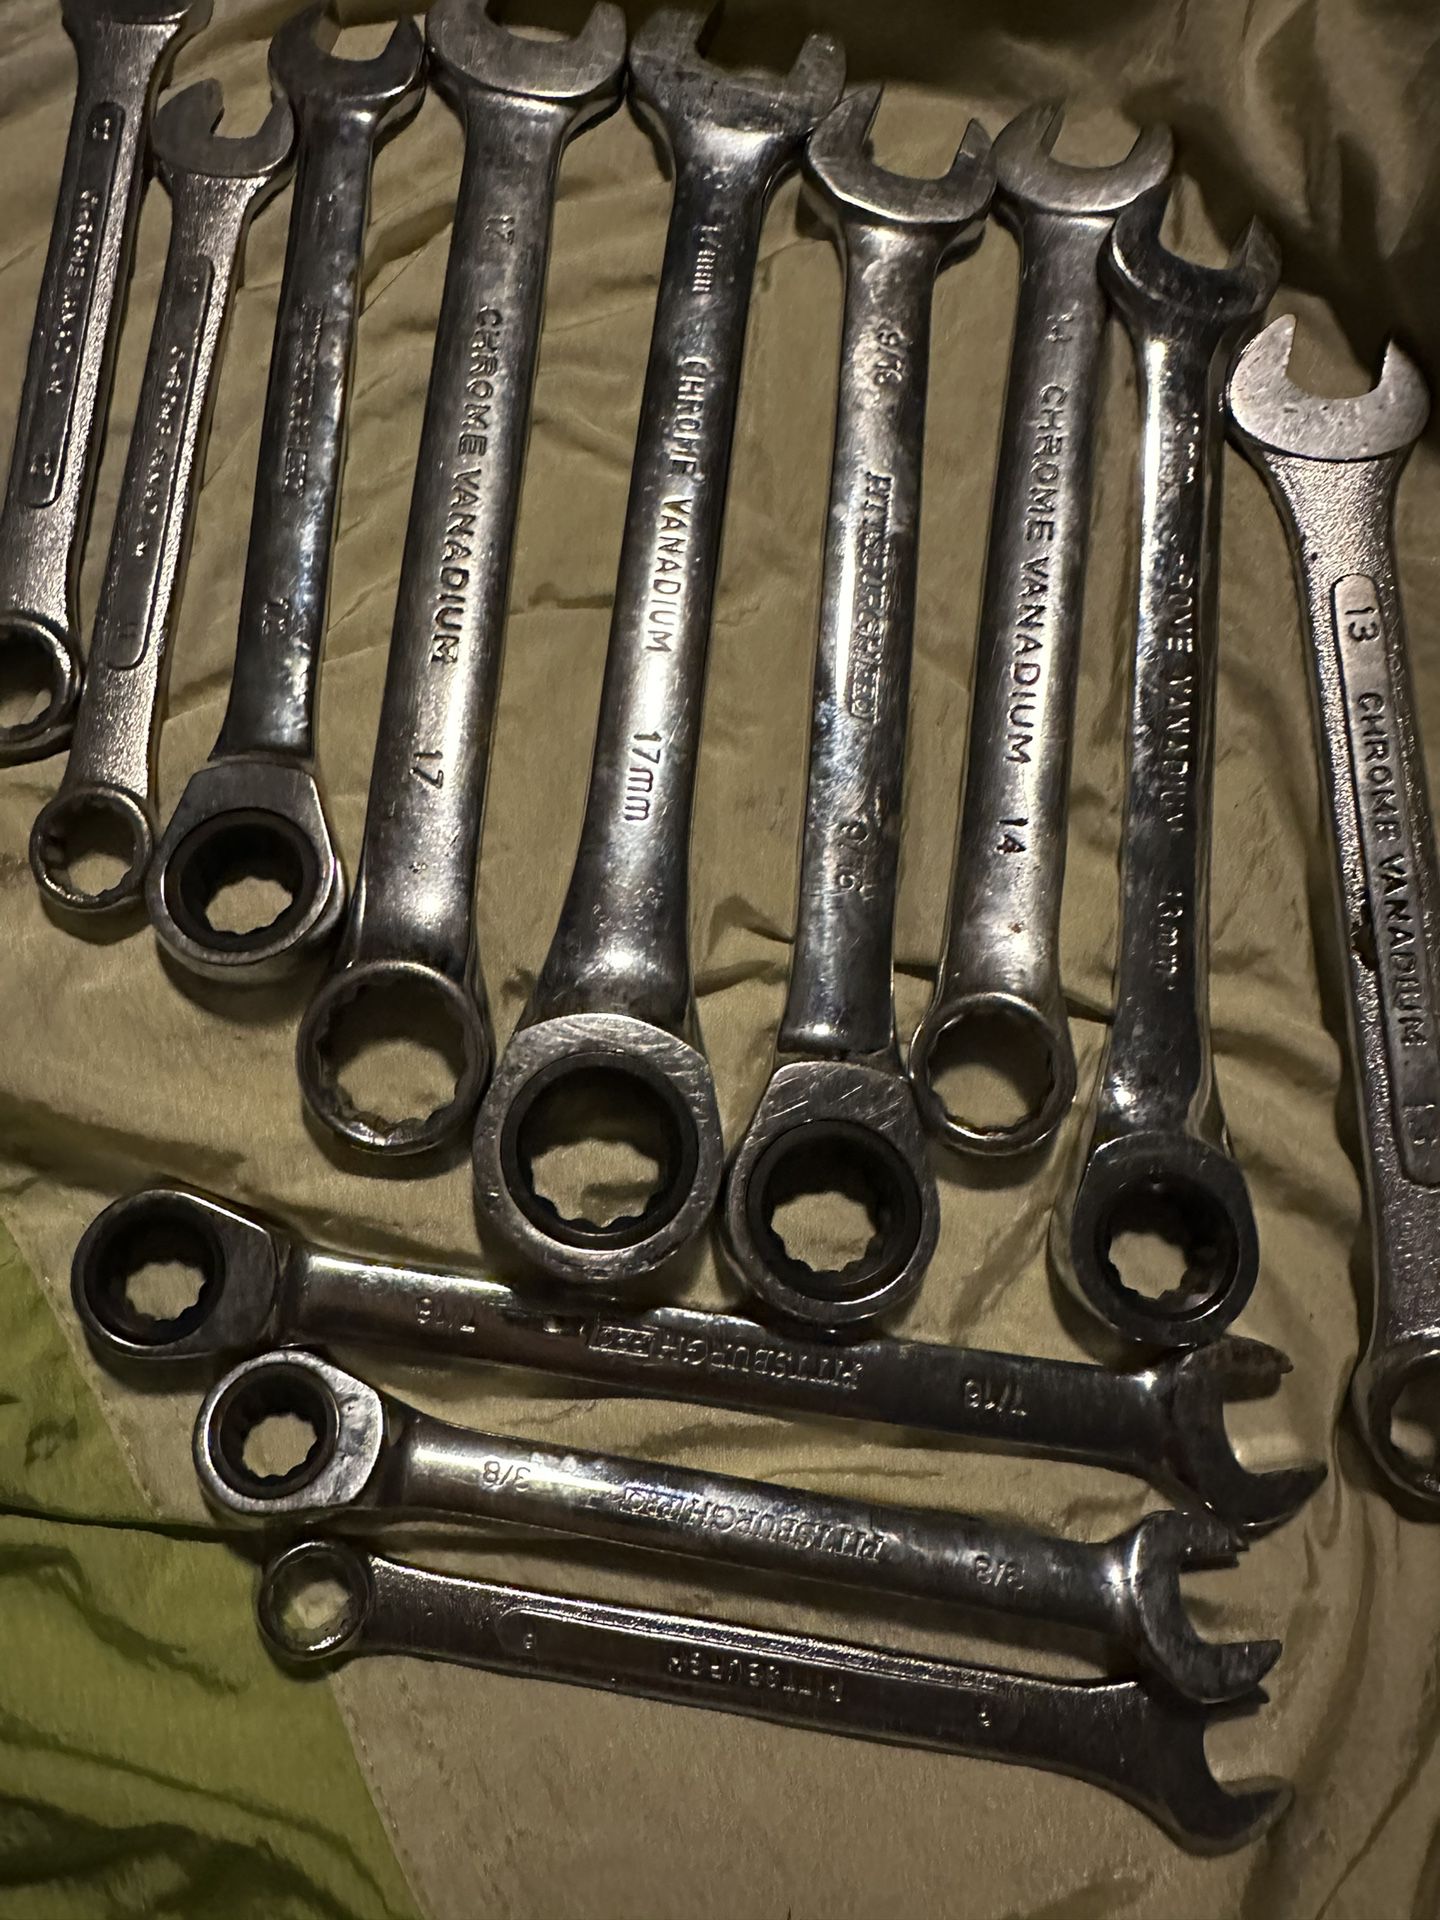 Mechanic Wrenches, Pittsburgh 12pieced